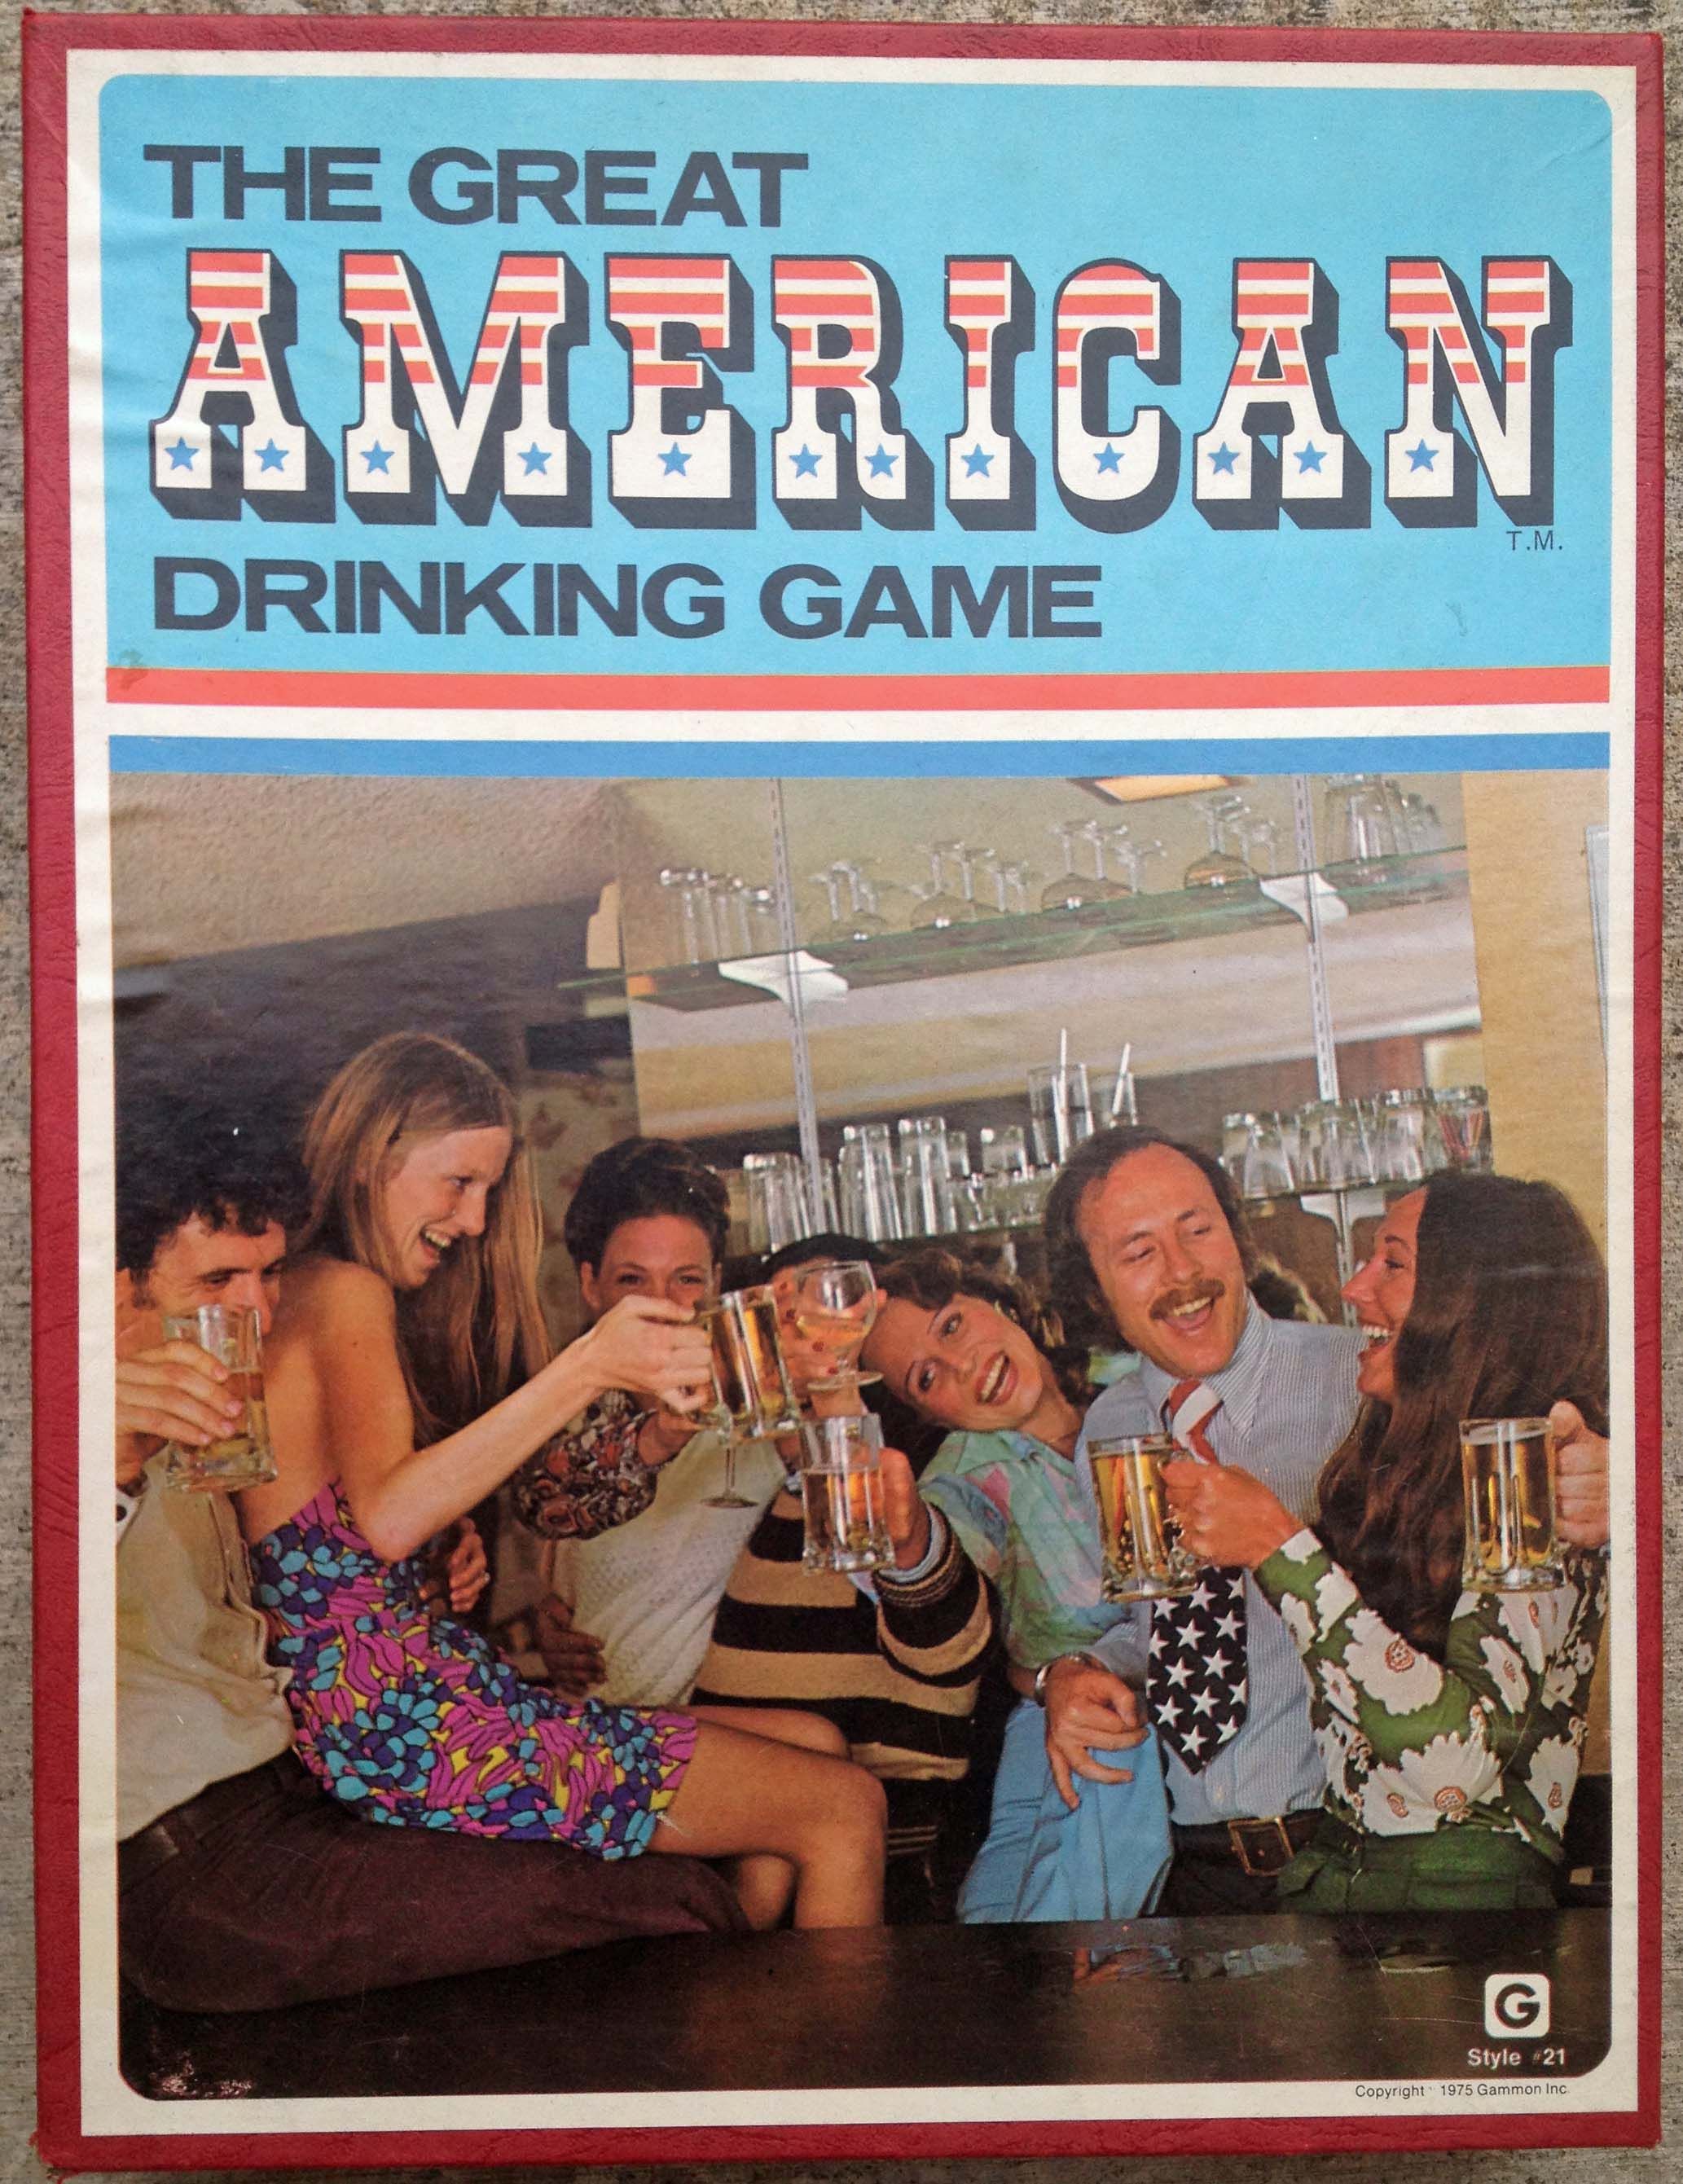 The Great American Drinking Game